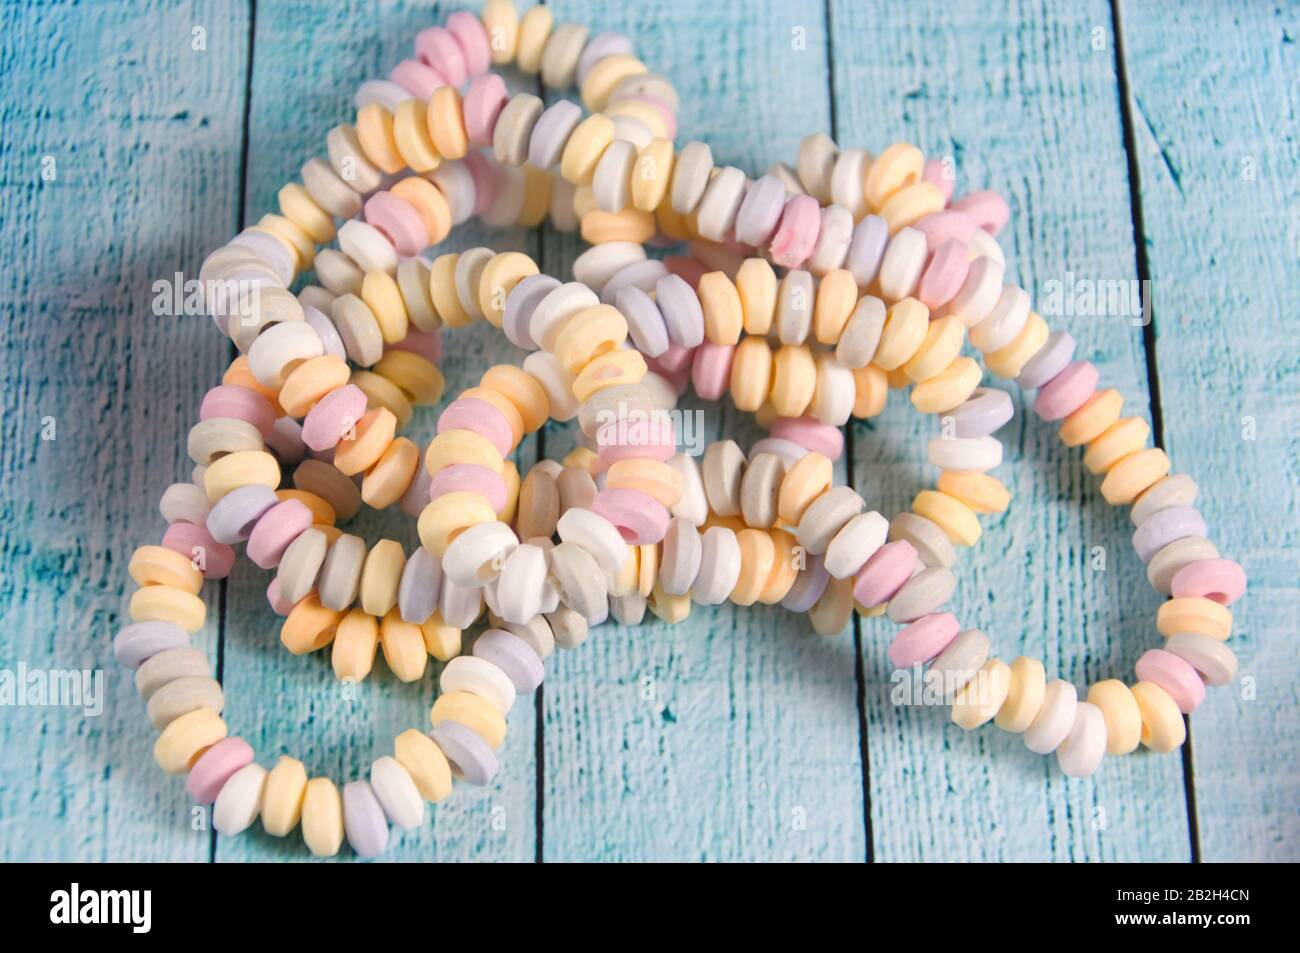 candy necklace Stock Photo